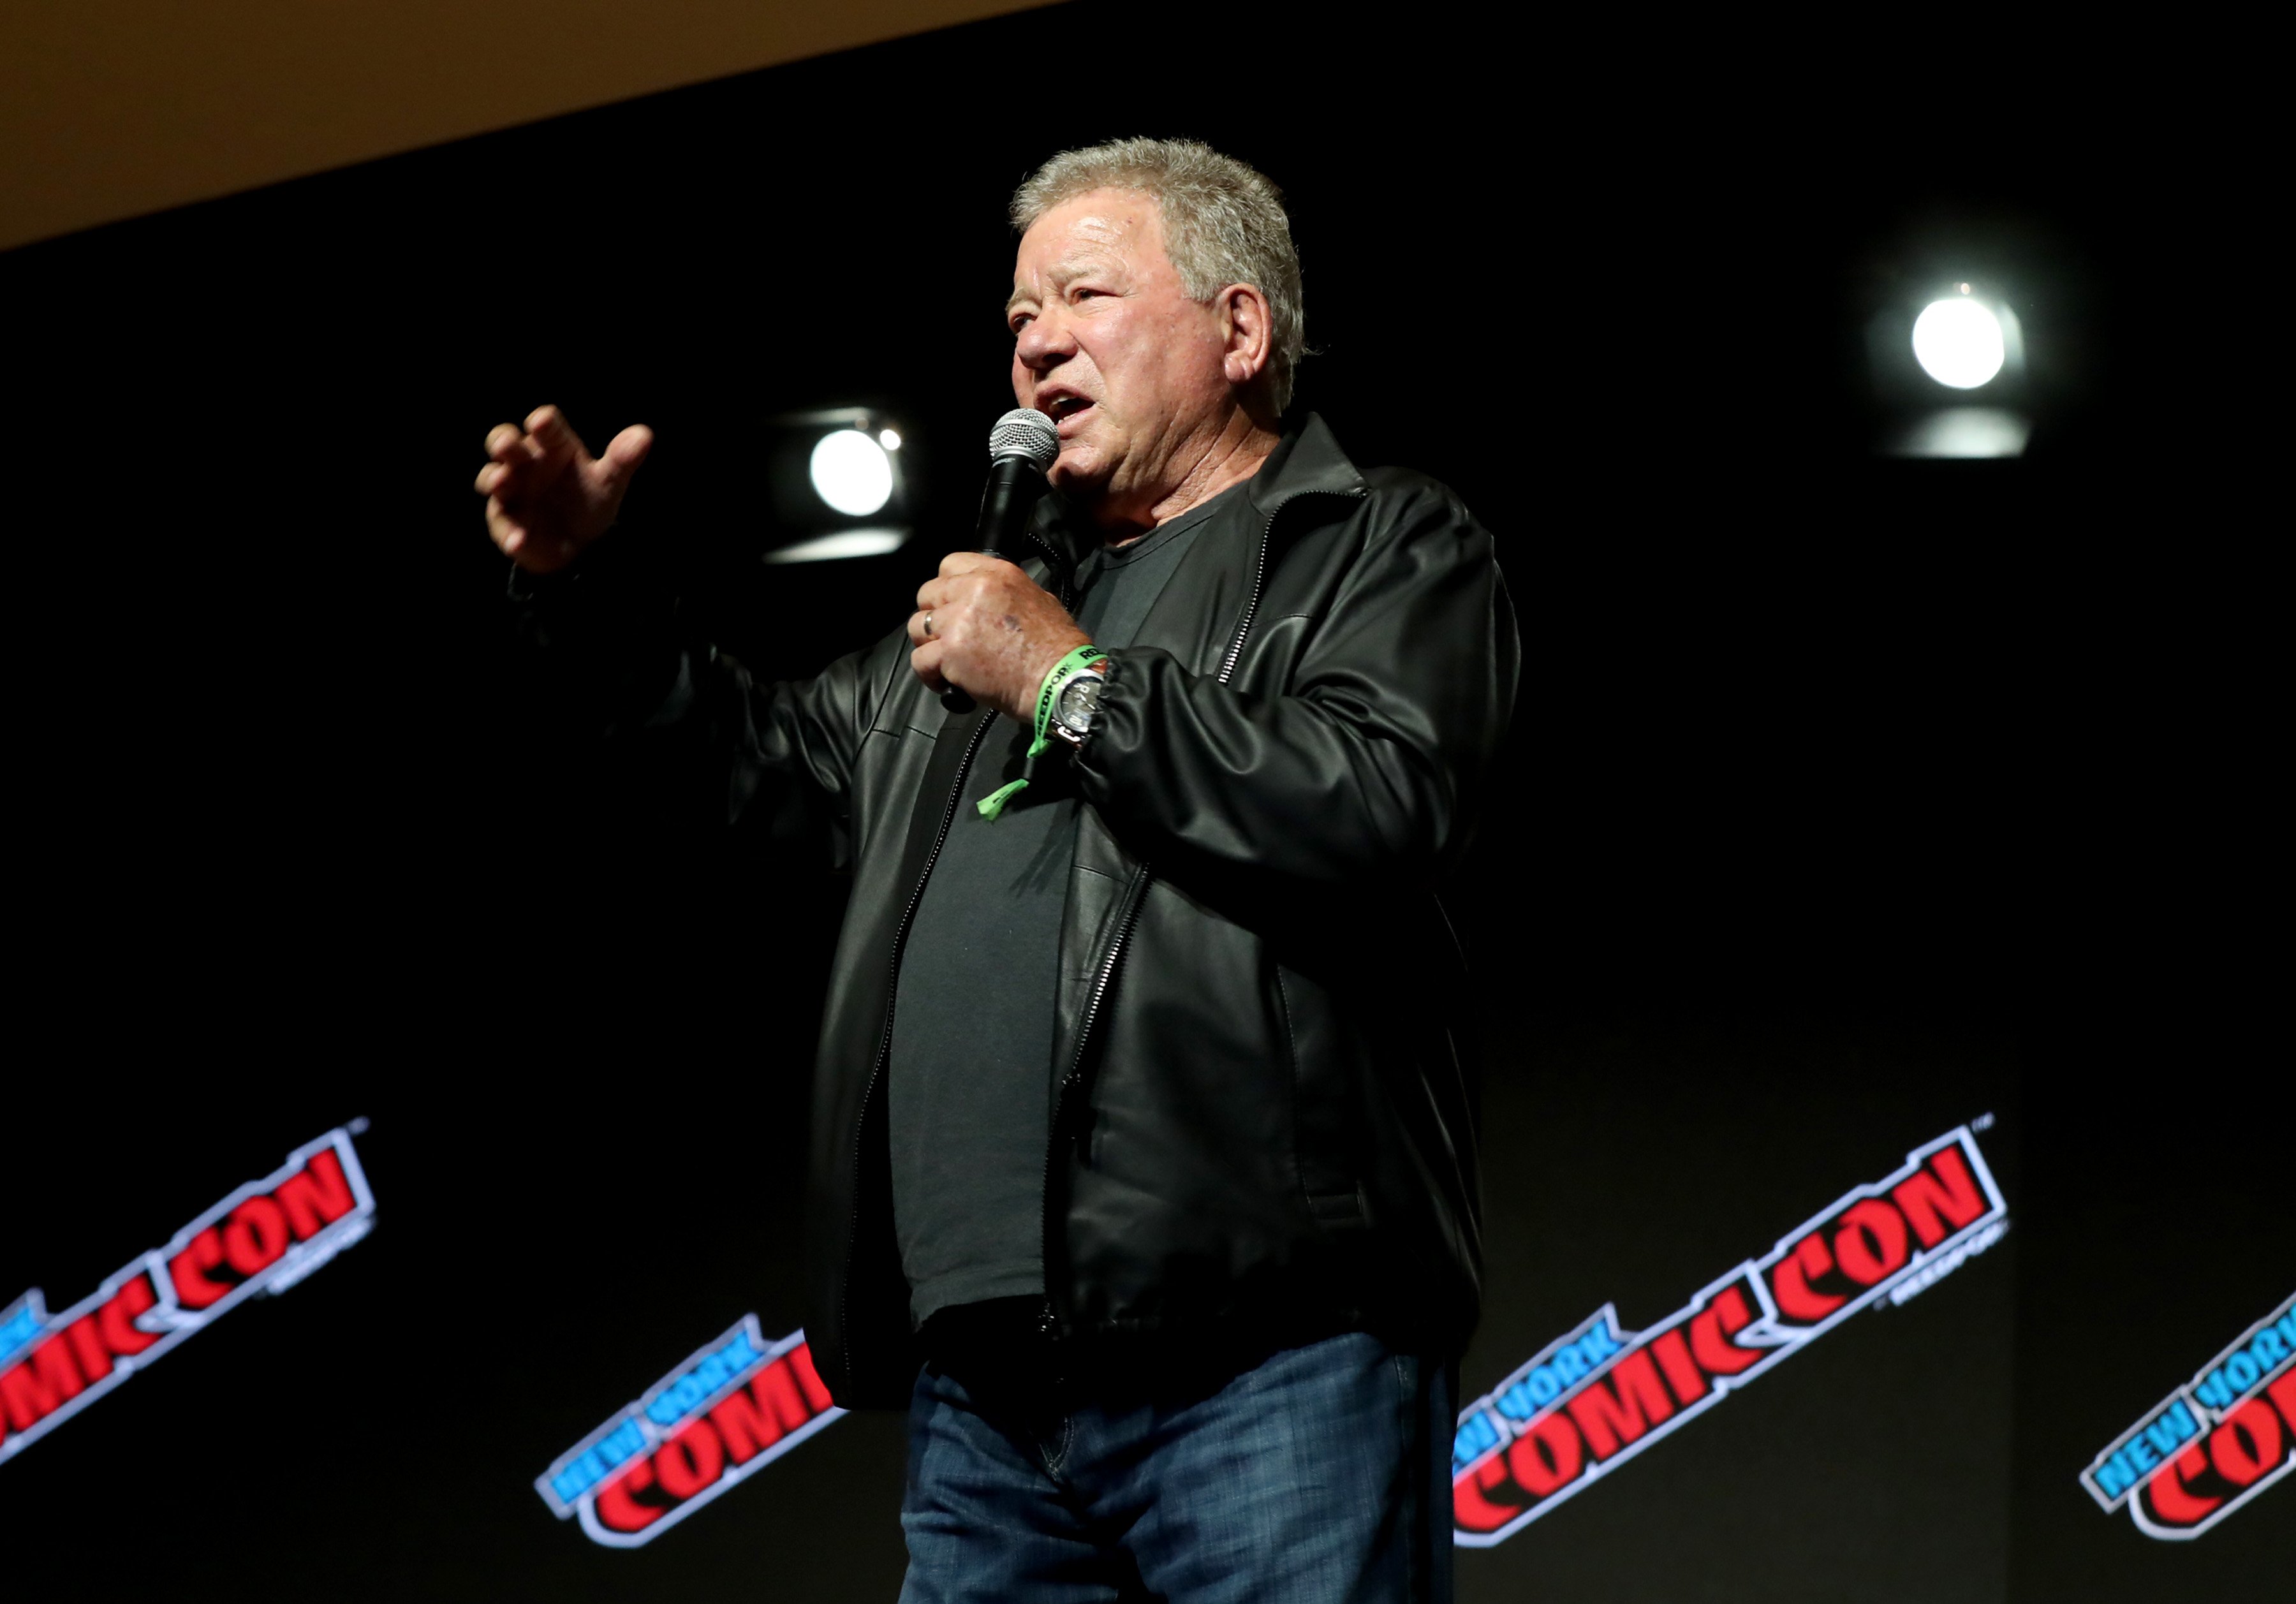 William Shatner at the William Shatner Spotlight panel during Day 1 of New York Comic Con 2021 at Jacob Javits Center in New York City | Photo: Bennett Raglin/Getty Images for ReedPop